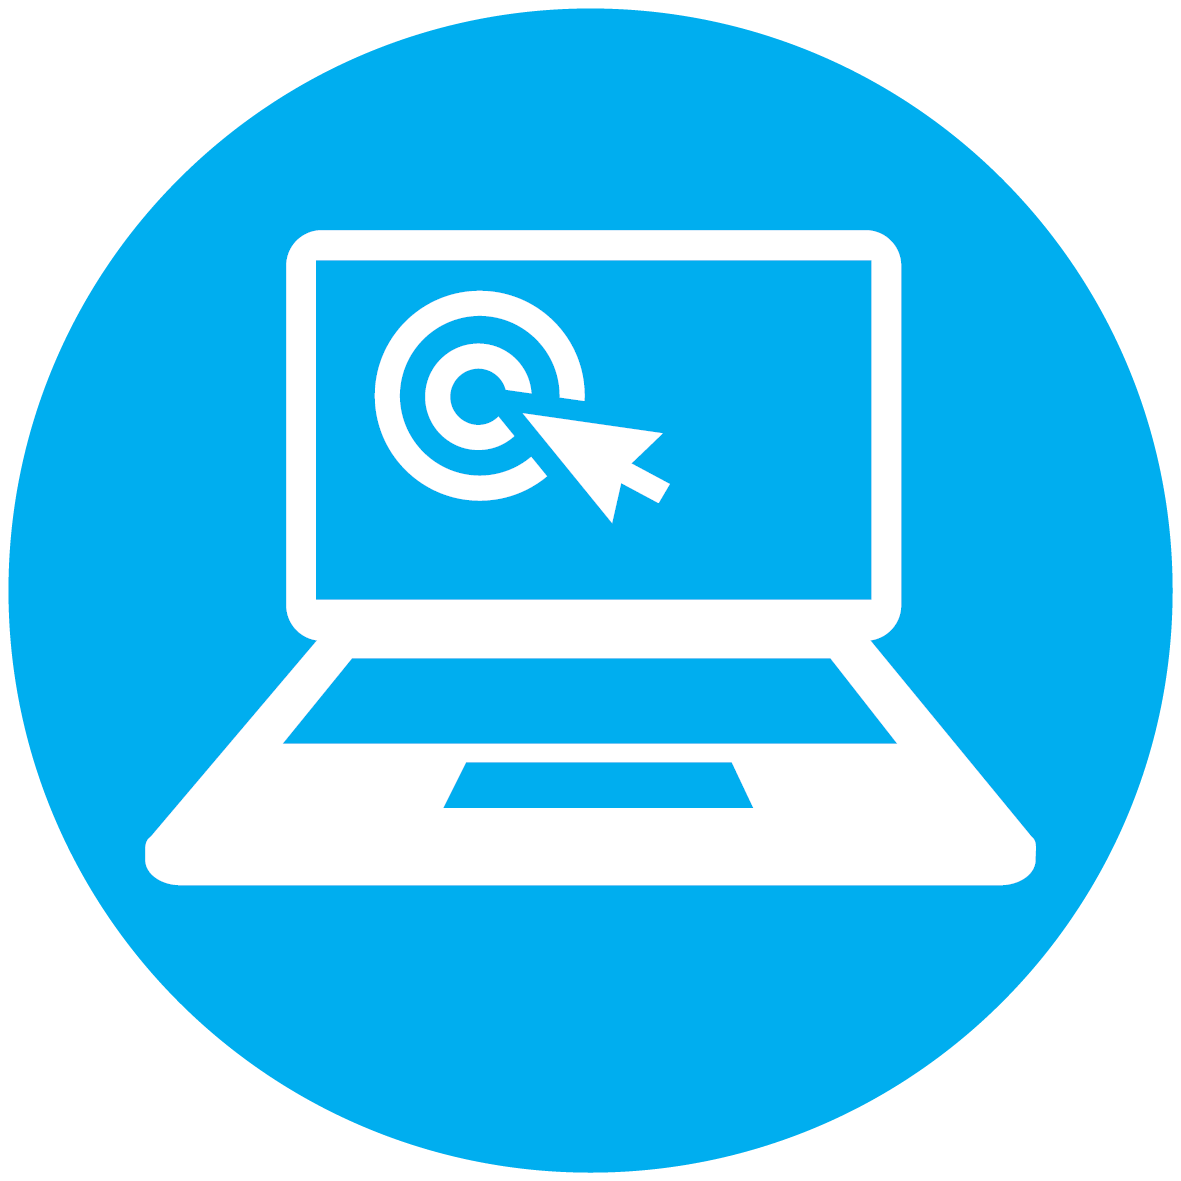 An icon of a laptop with the mouse clicking on a target symbol on the screen.